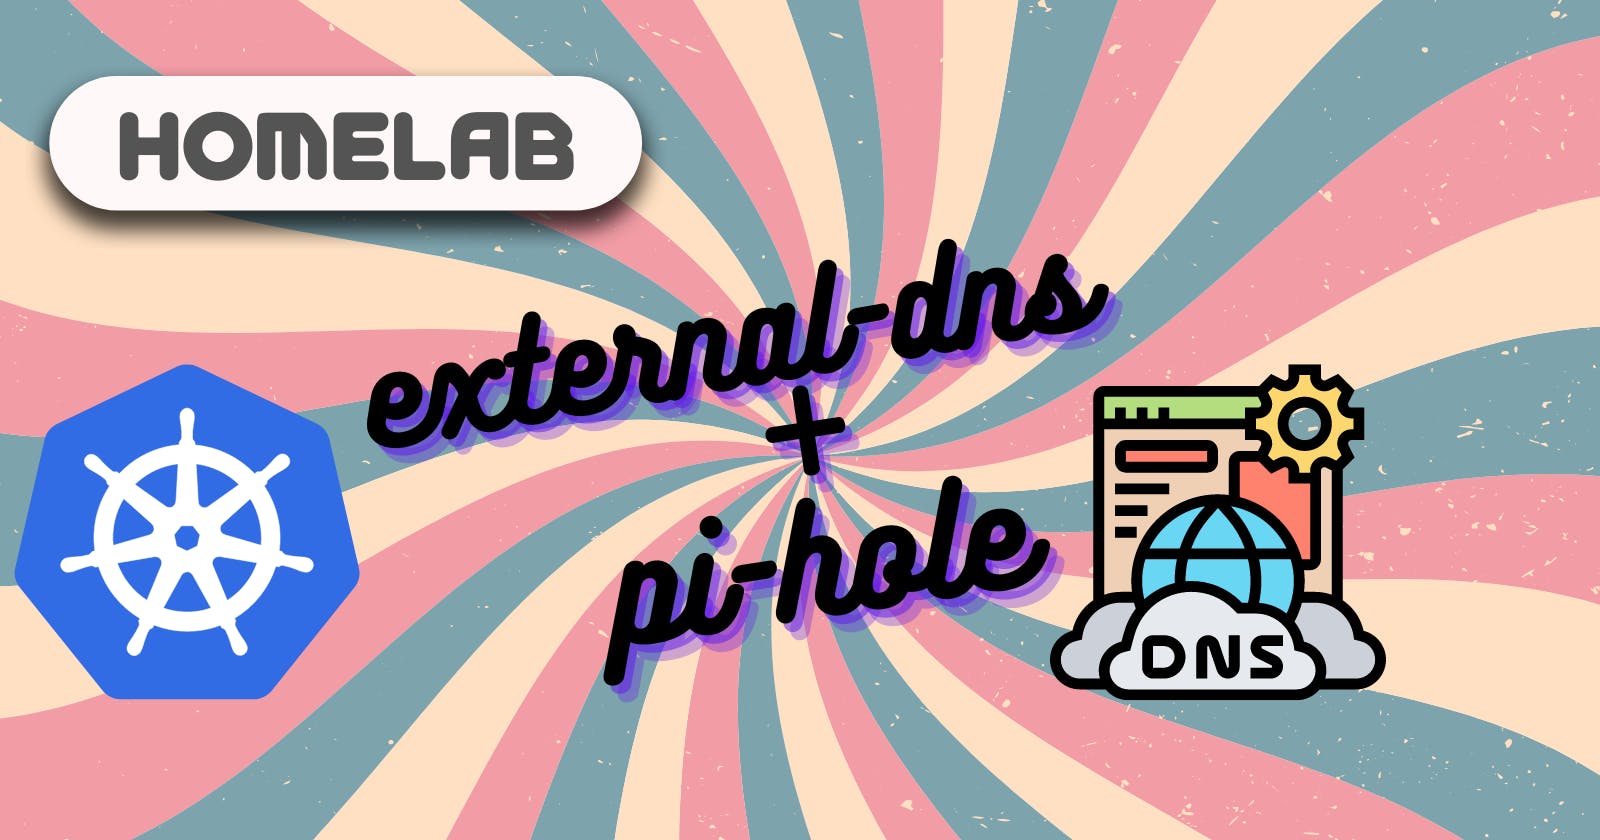 Using pi-hole as your external-dns provider in Kubernetes